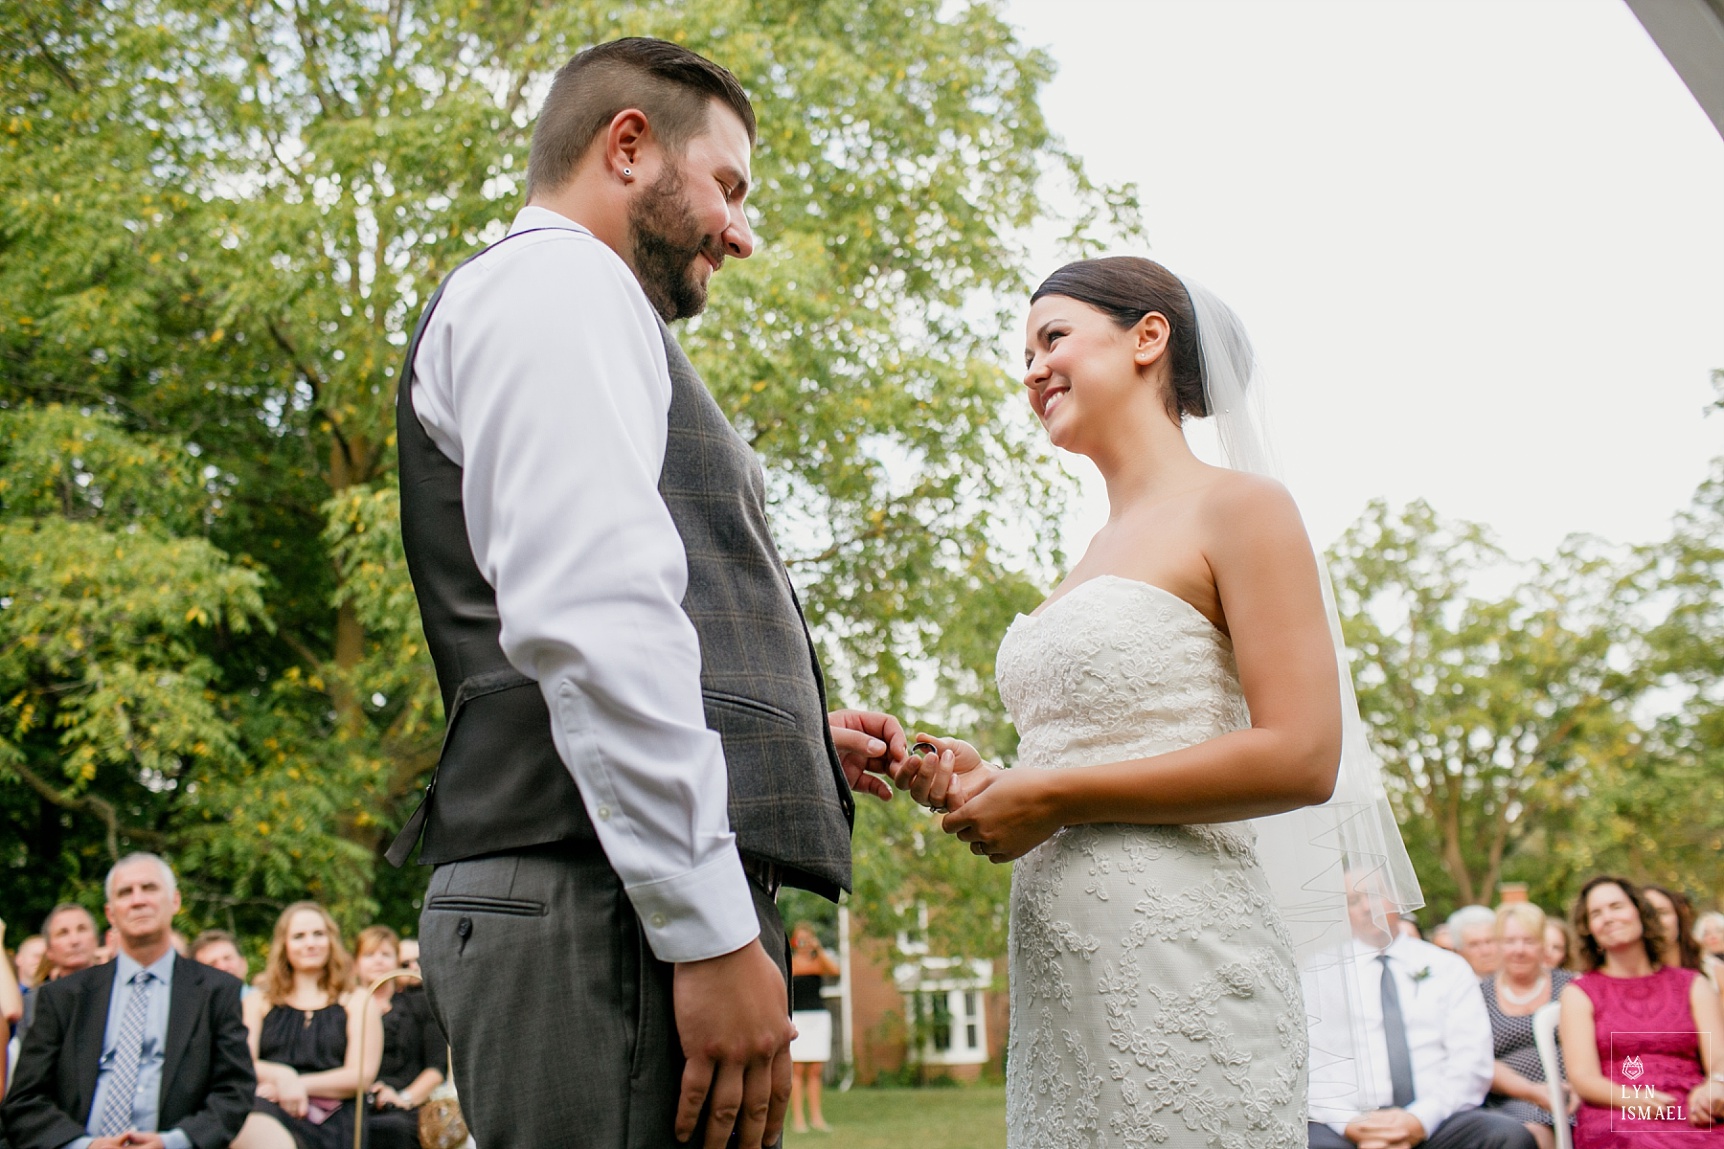 Bride and groom exchanges rings at an outdoor wedding ceremony at Steckle Heritage Farms in Kitchener, Ontario